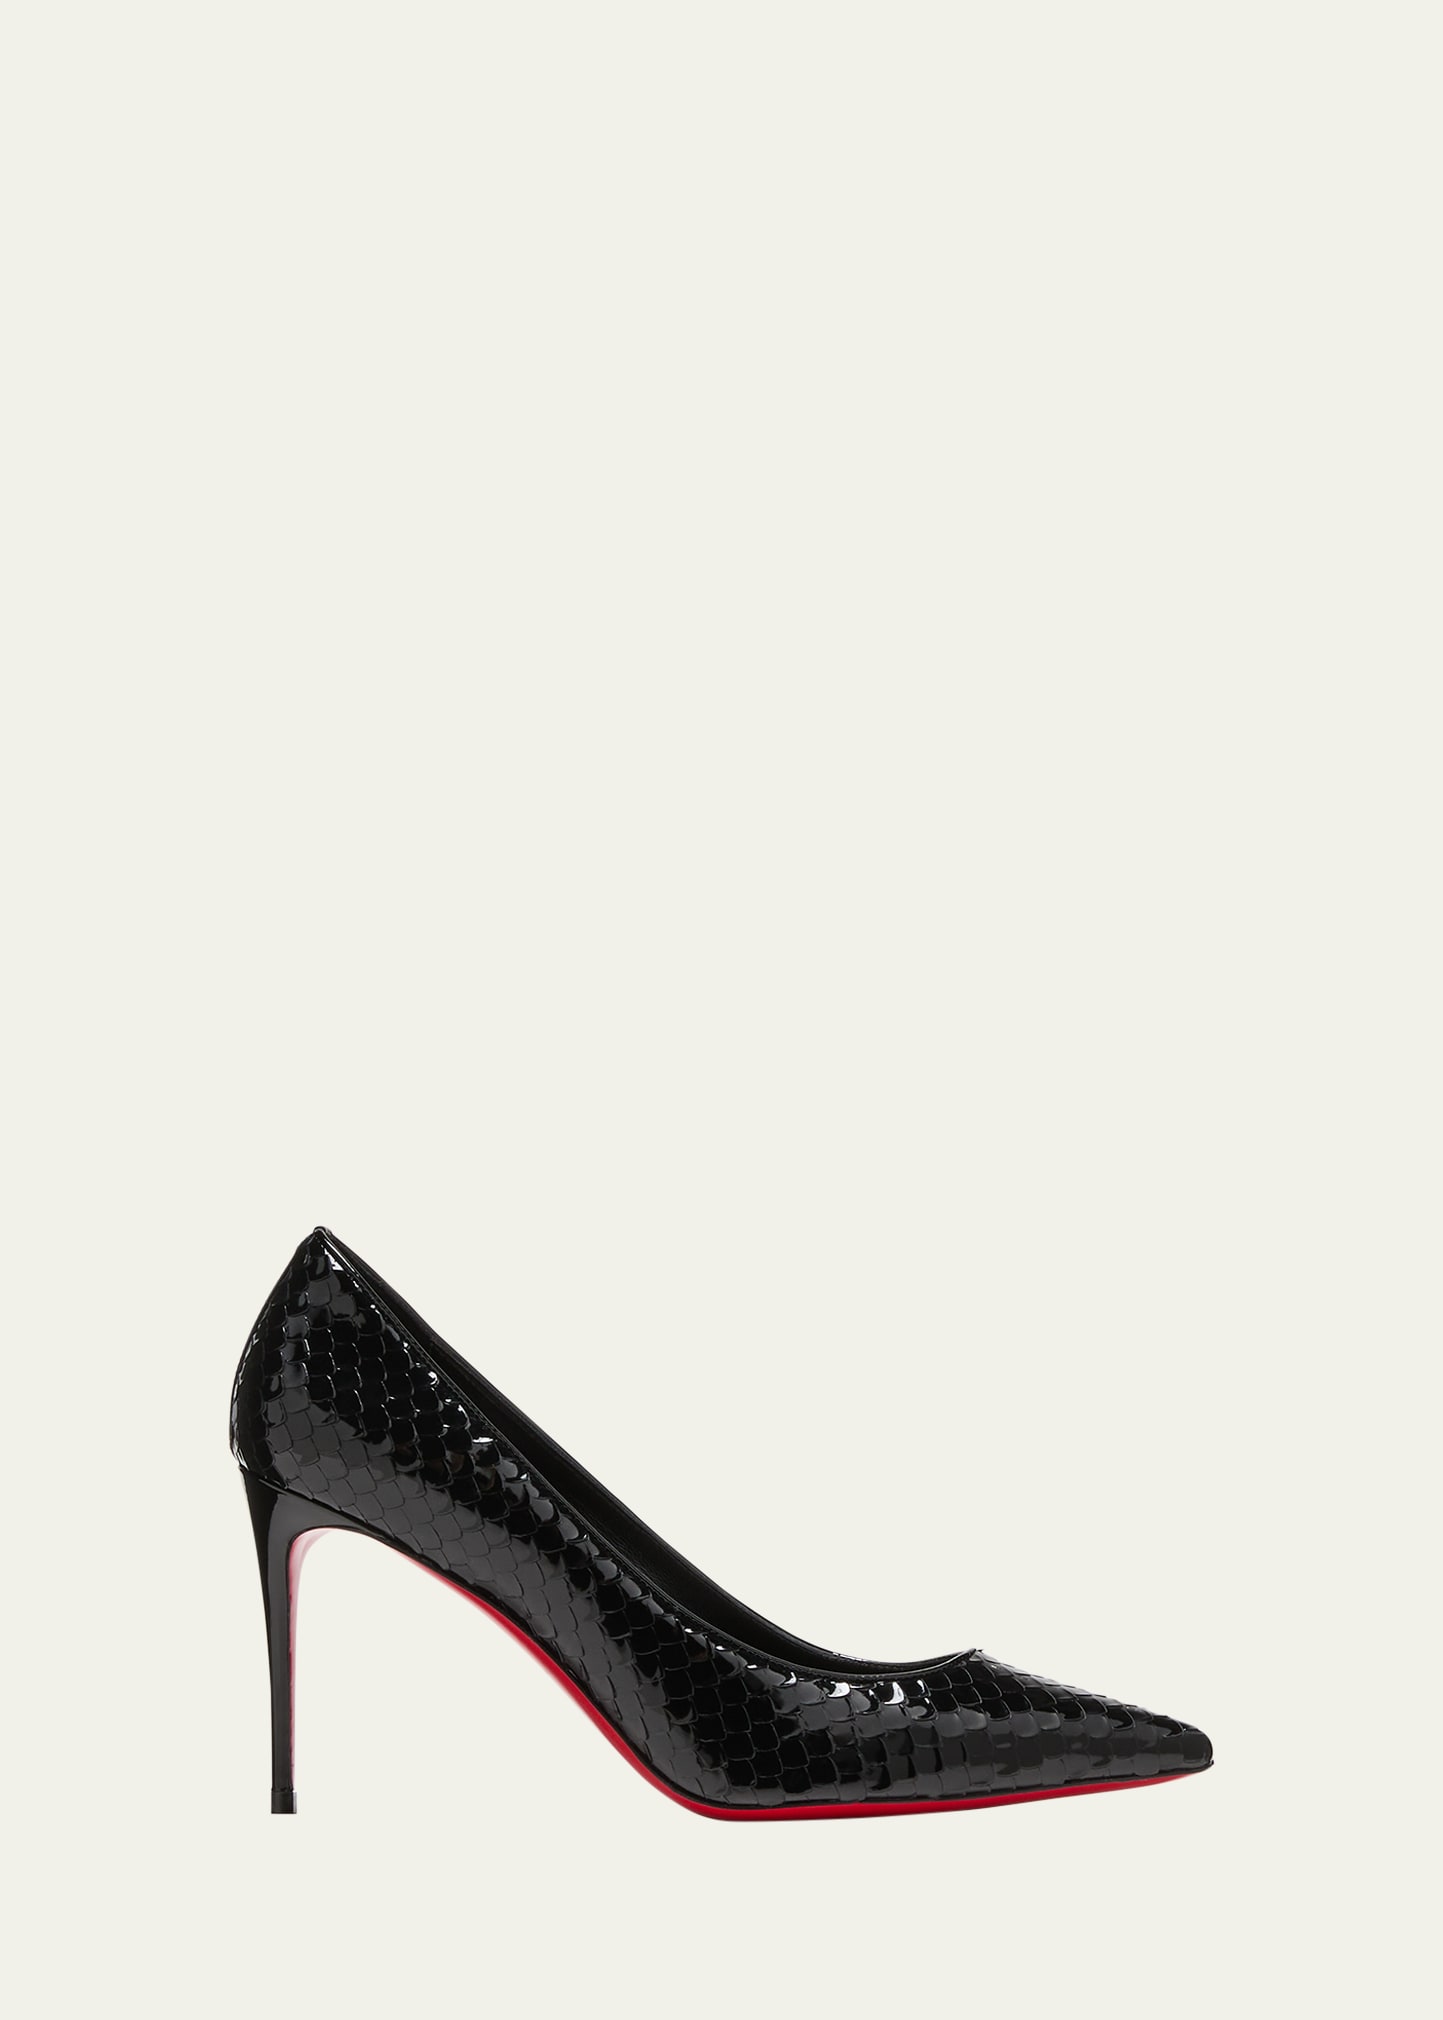 Kate Embossed Patent Red Sole Pumps